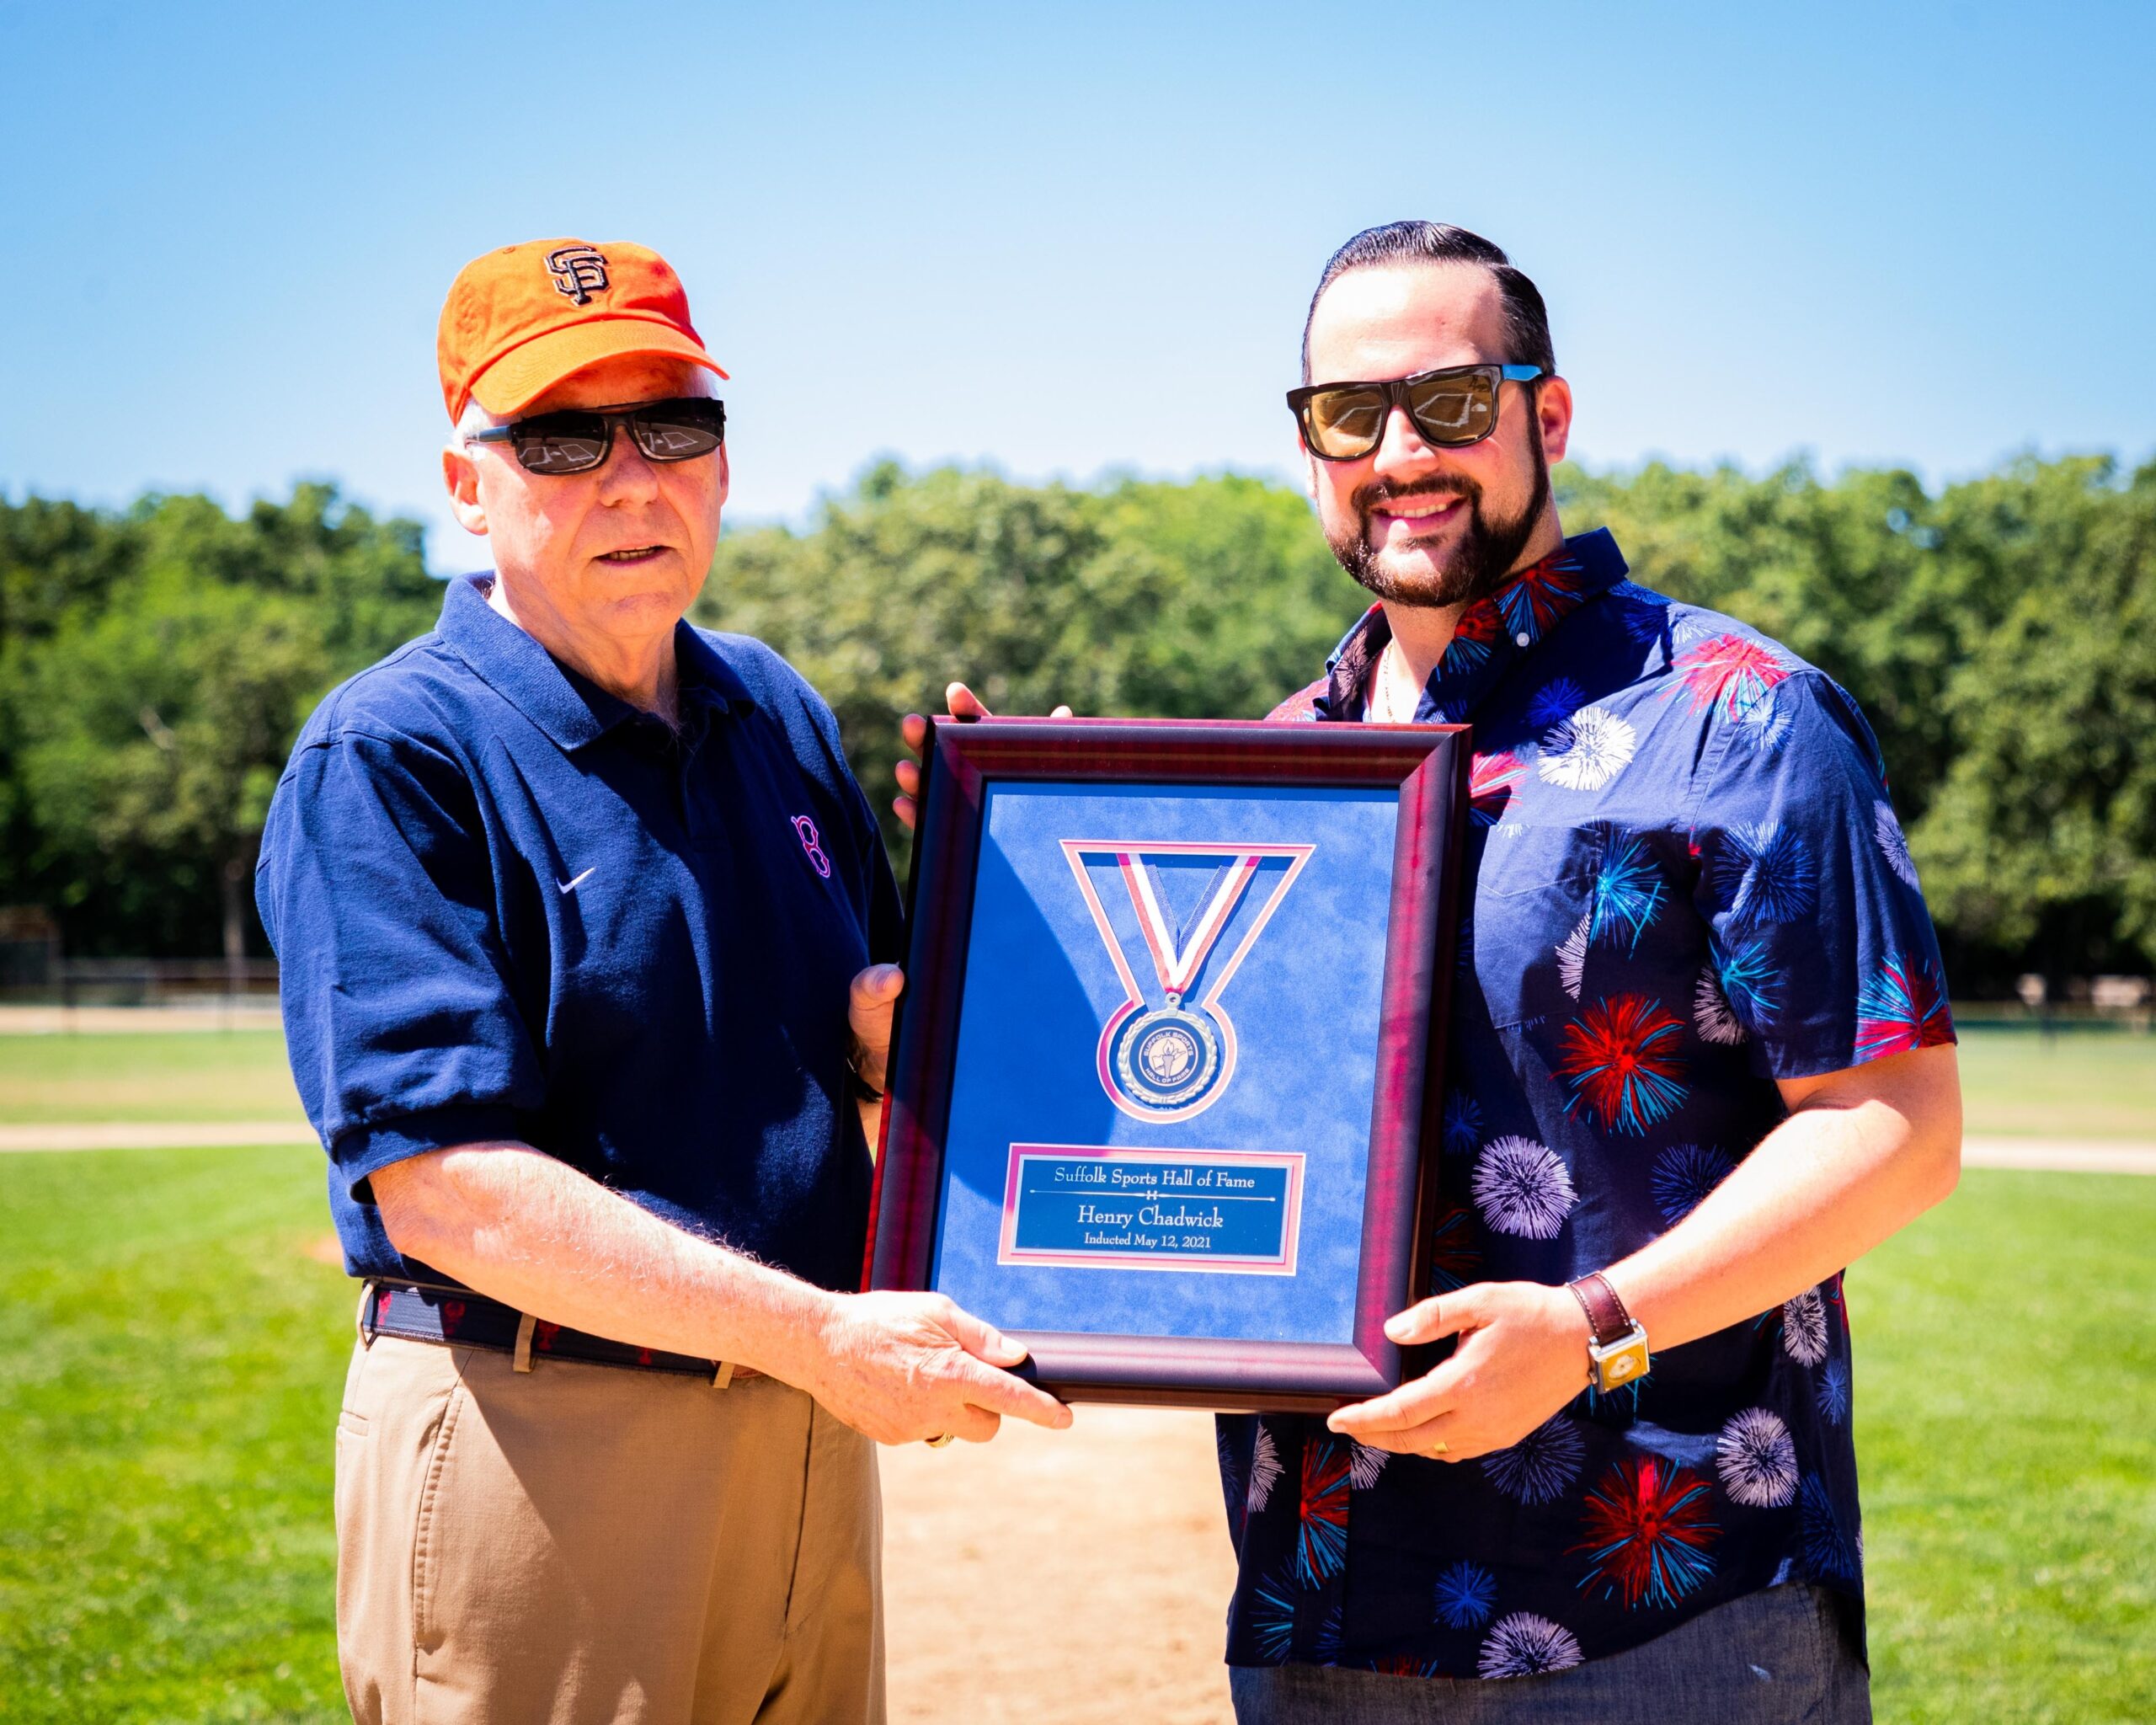 Jack Youngs, left, is presented Henry Chadwick's medal from Suffolk Sports Hall of Fame President Chris Vaccaro at Mashashimuet Park in Sag Harbor on Monday.   DEMETRIUS KAZANAS